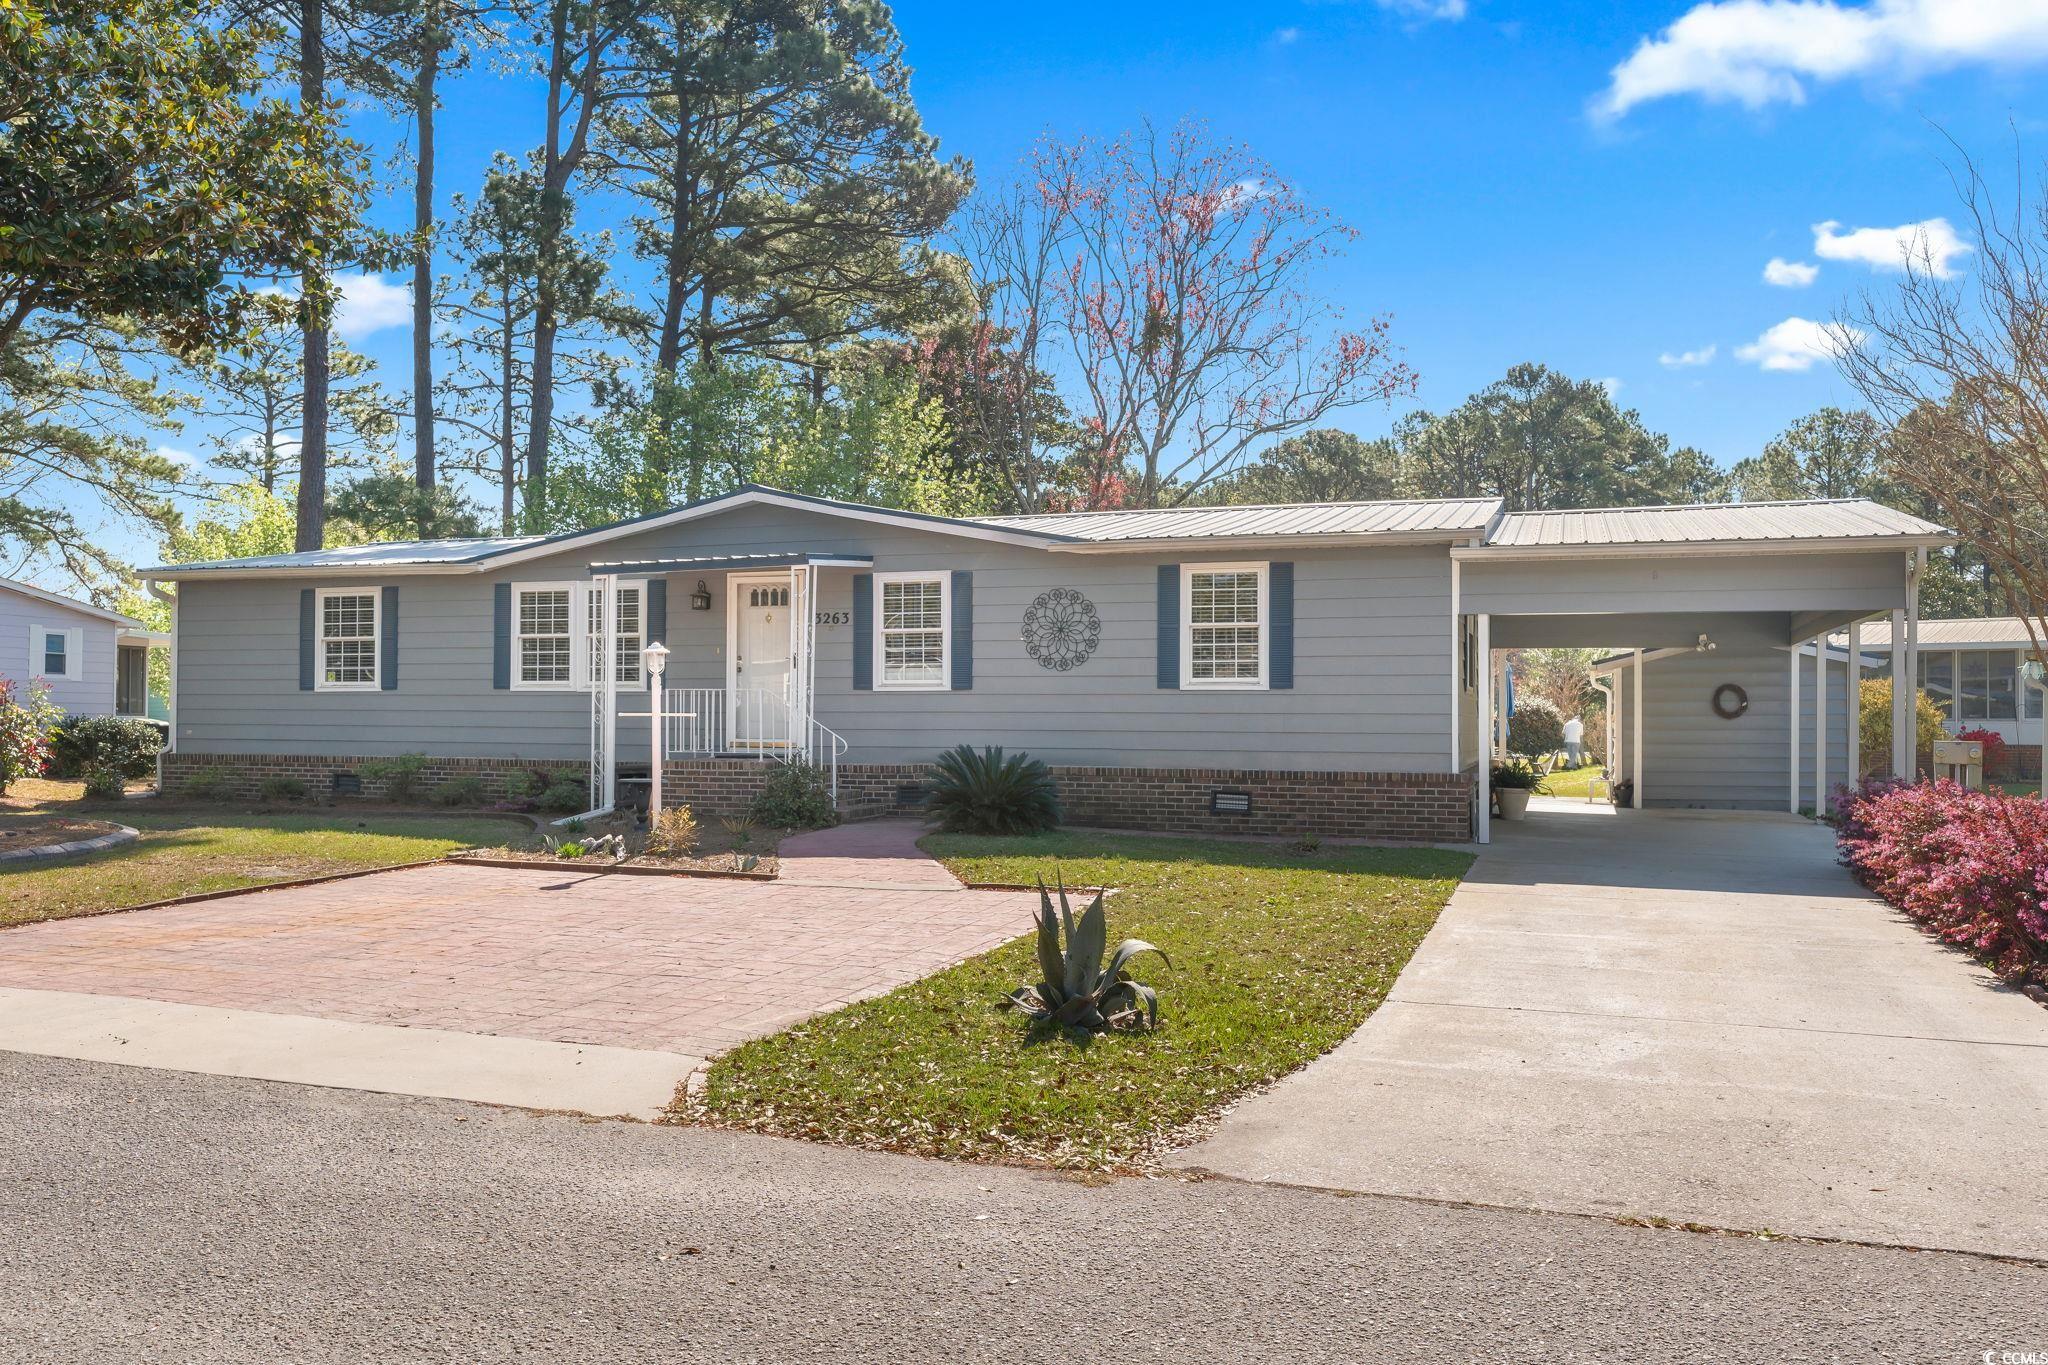 welcome home to this lovely 3 bed/2 bath ranch style manufactured home. if you are looking for the relaxed, low-maintenance lifestyle in a 55 and over community, ocean pines is the place for you. as you drive up, you won't be able to miss the beautiful landscaping surrounding the property. once inside, you will be wowed by the spaciousness of all of the rooms. home comes complete with all appliances including freezer located in laundry room. all bedrooms have walk-in closets providing lots of storage. sit and relax in the 22 x 9 sun porch room or go outside and enjoy the summer breeze on the grilling patio. plenty of parking with two driveways. room for your car and a golf cart. detached storage shed provides a place for all of your tools. 50 year roof installed in 2016. hvac in 2019. there is a community amenity center which features two pools, an exercise room, a library, and much more to complement the frequent community scheduled events. just 2 minutes to the sandy beaches of the beautiful atlantic ocean and close to shopping, dining, entertainment and golf.  all measurements and square footage are approximate and not guaranteed. buyer is responsible for verification.